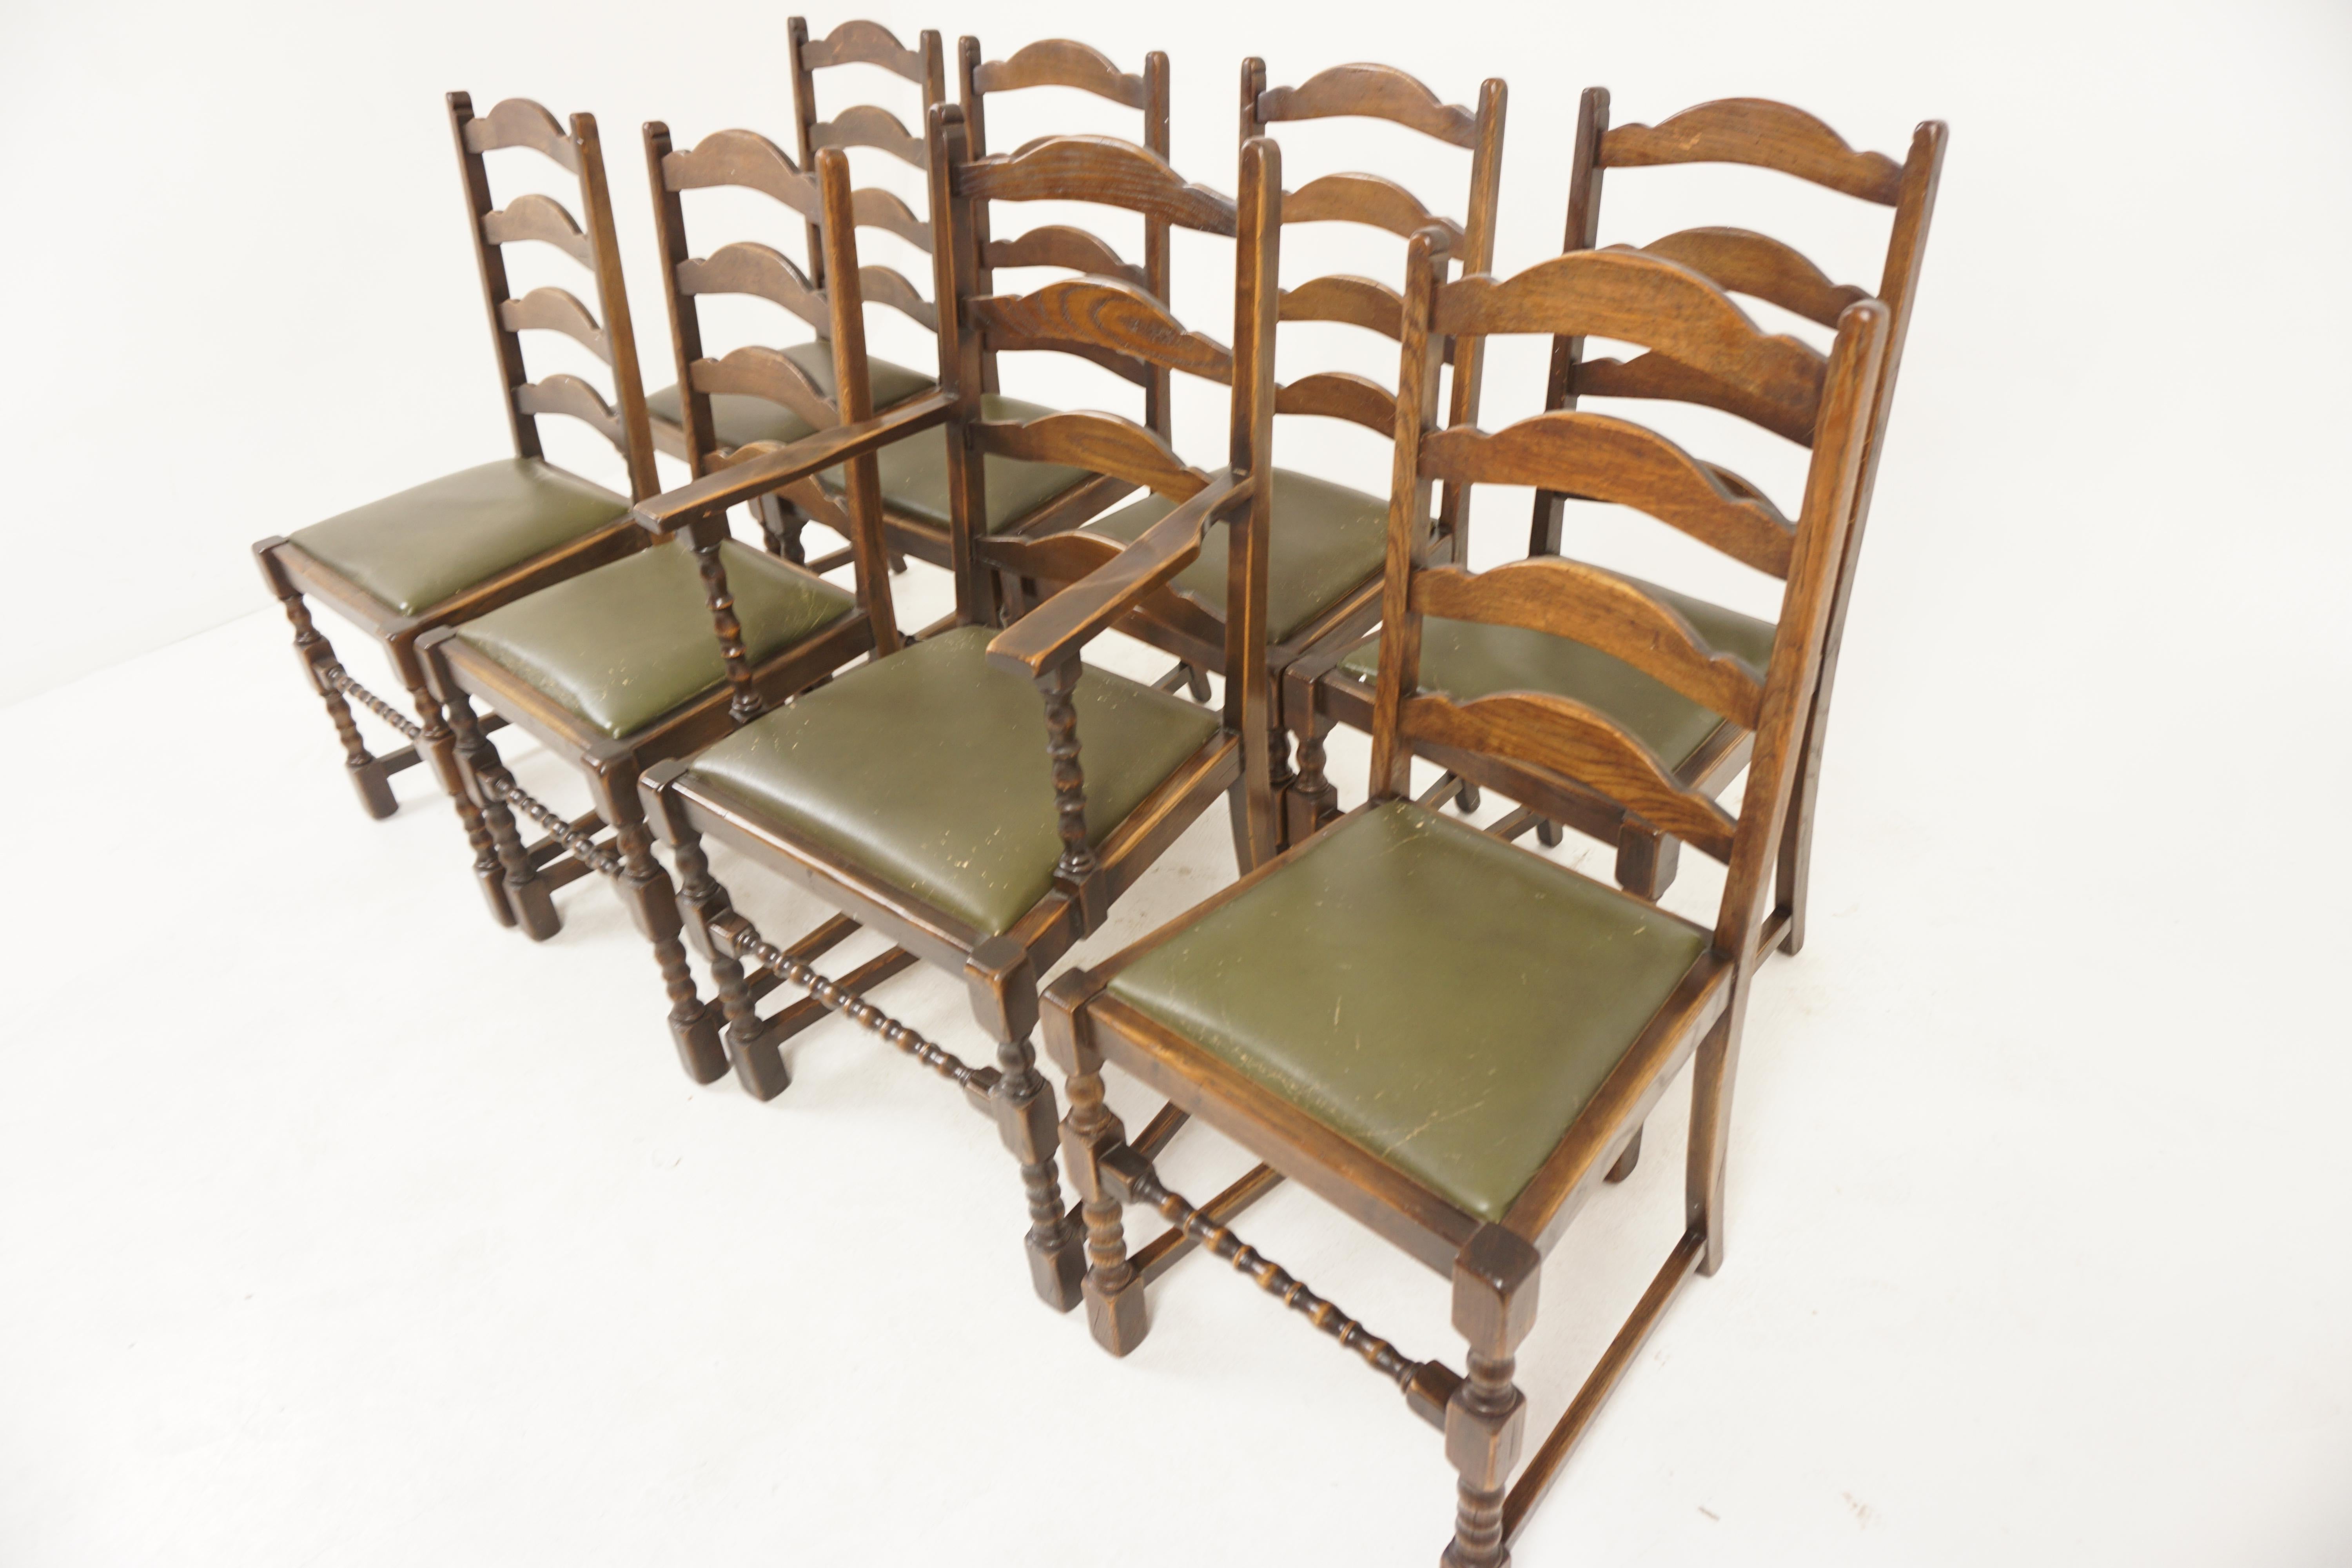 Vintage Set Of 8 Oak Ladder Back Dining Chairs, Scotland 1930, H1175

Solid Oak
Original Finish
The chairs have a four rung high ladder back with shaped top supports
Lift out upholstered vinyl seat 
Standing on turned legs with a bobbin front